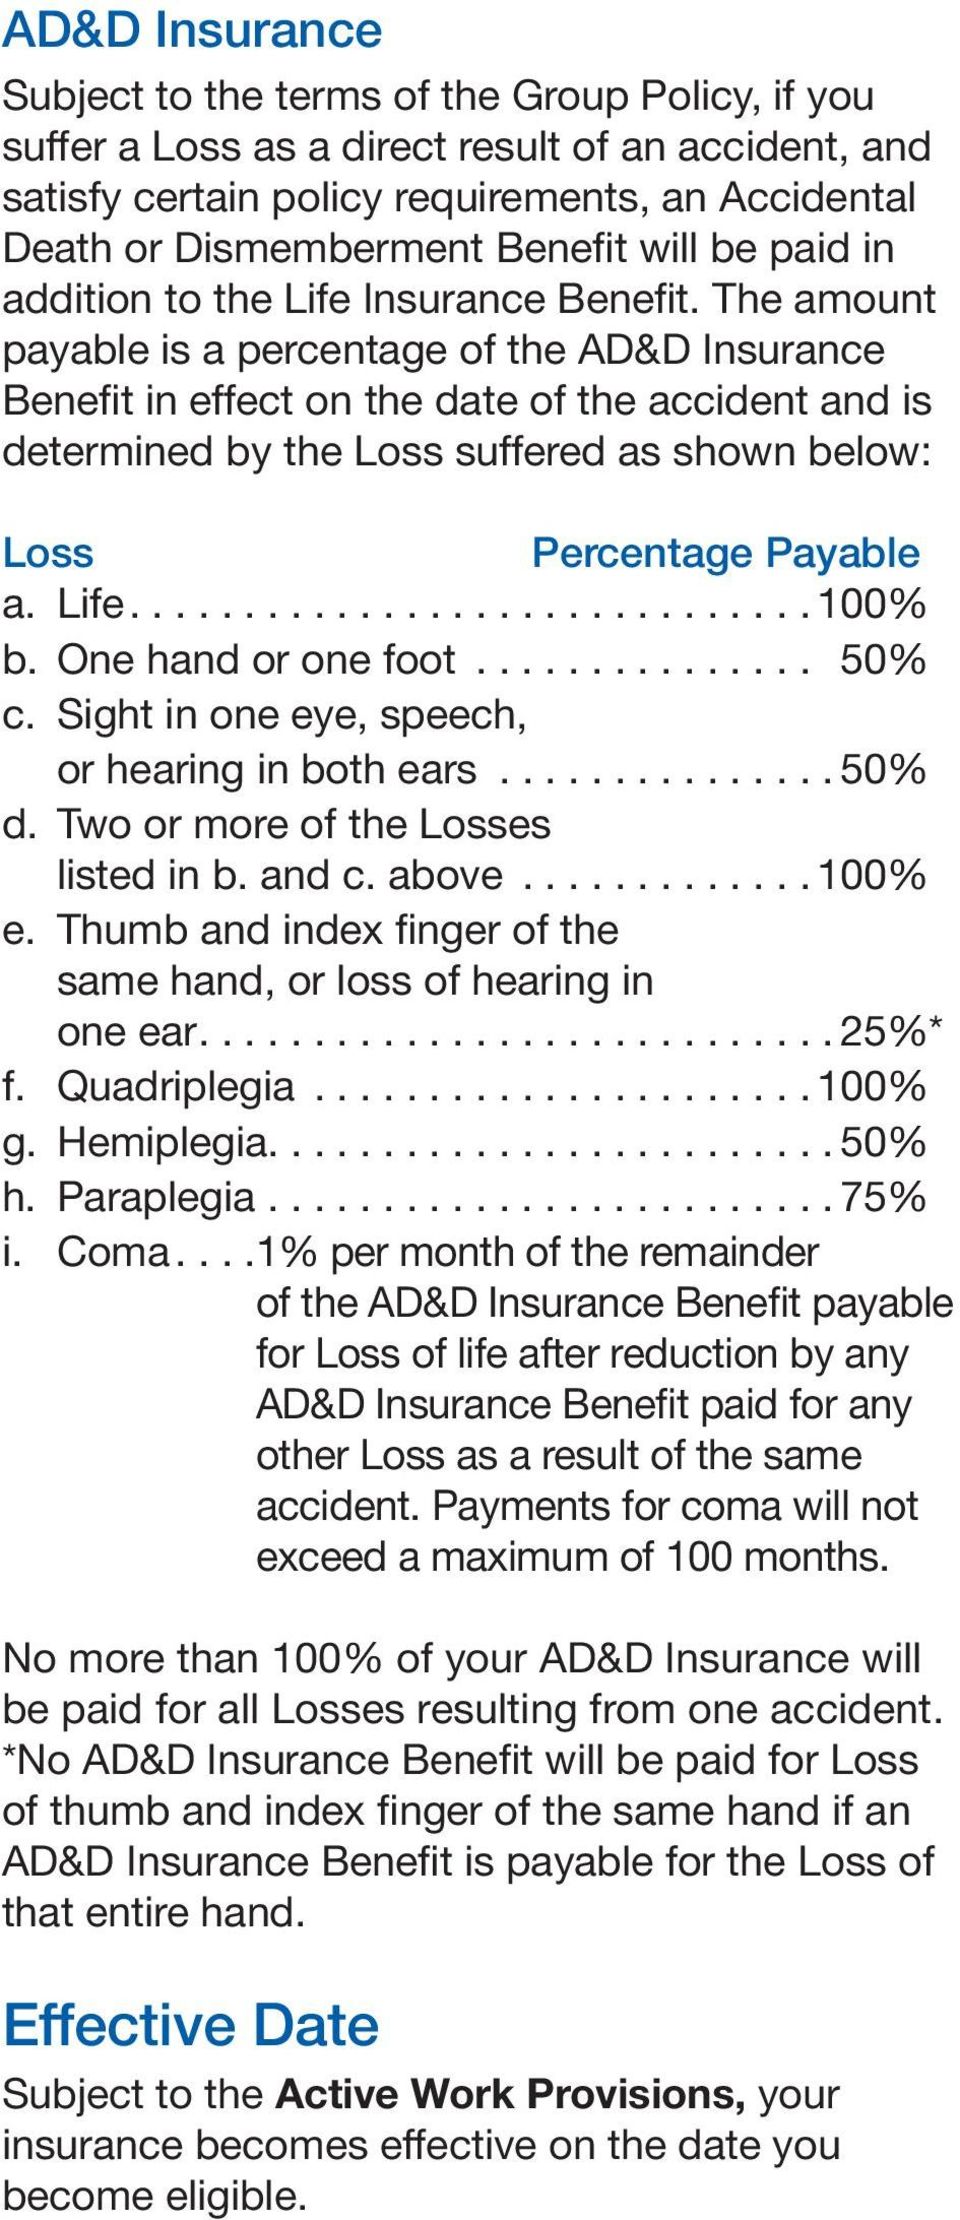 The amount payable is a percentage of the AD&D Insurance Benefit in effect on the date of the accident and is determined by the Loss suffered as shown below: Loss Percentage Payable a. Life.............................. 100% b.